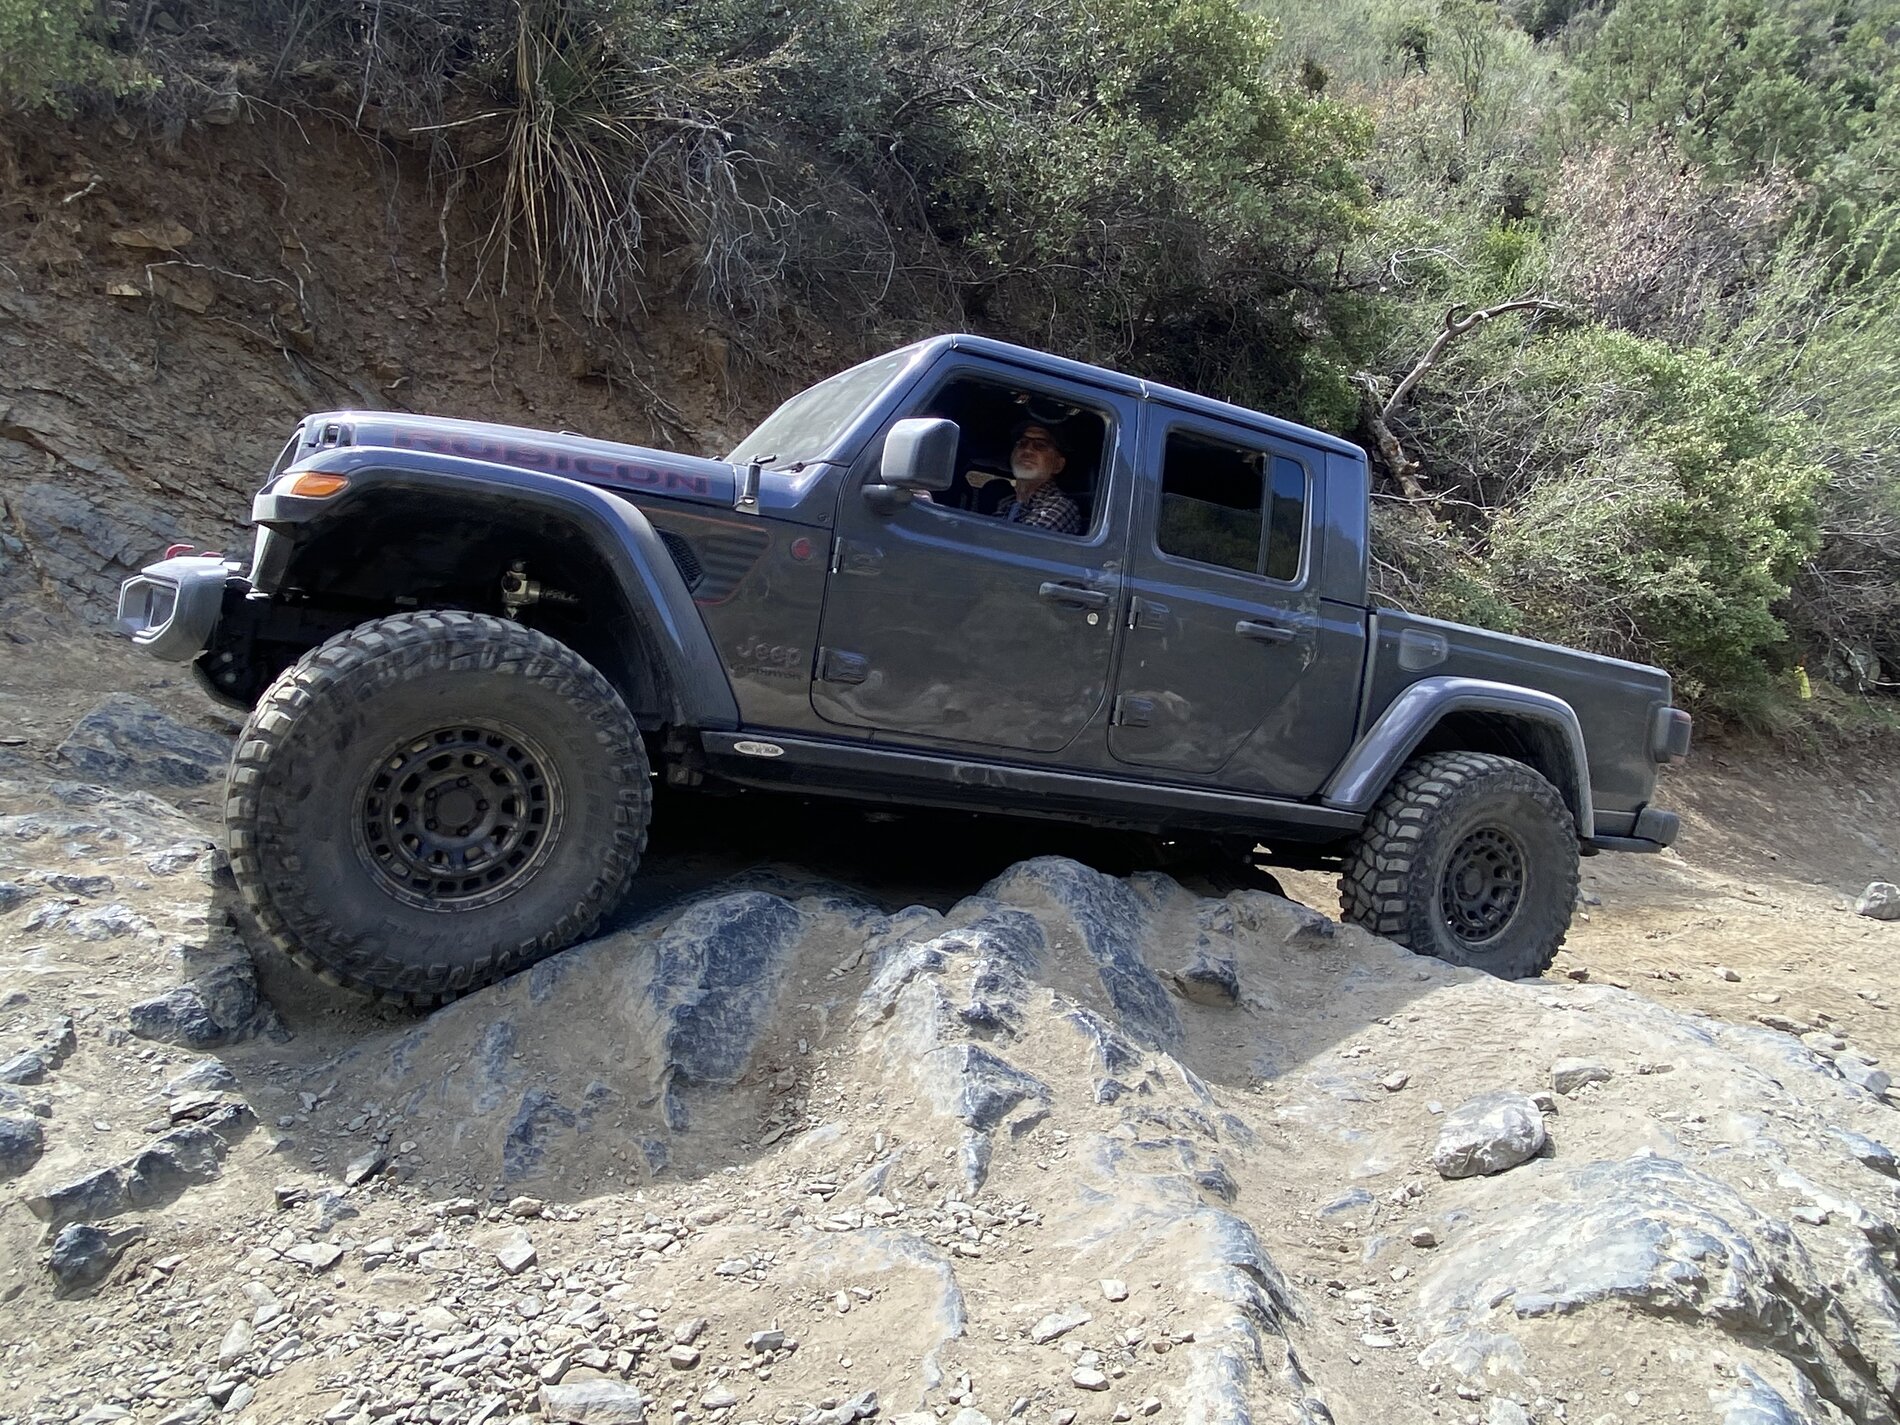 Jeep Gladiator ‘21 Gladiator Rubicon 3.0 with Mopar lift… what’s the best wheel and tire size combination suggestions 931934A4-584E-4379-83F2-9EAF38146E57